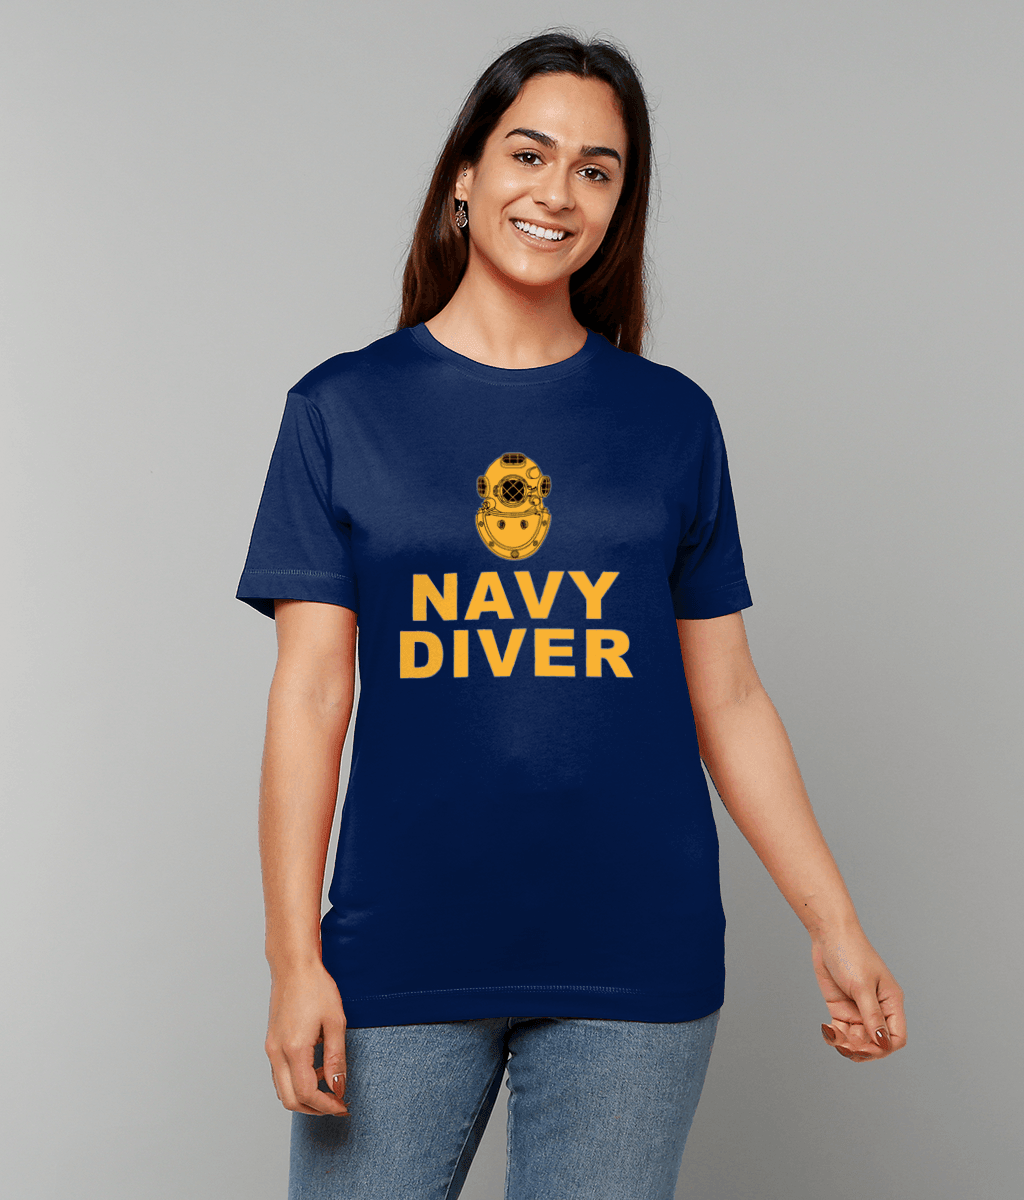 72 - Navy Diver - Full - T-Shirt (Printed Front) - Divers Gifts